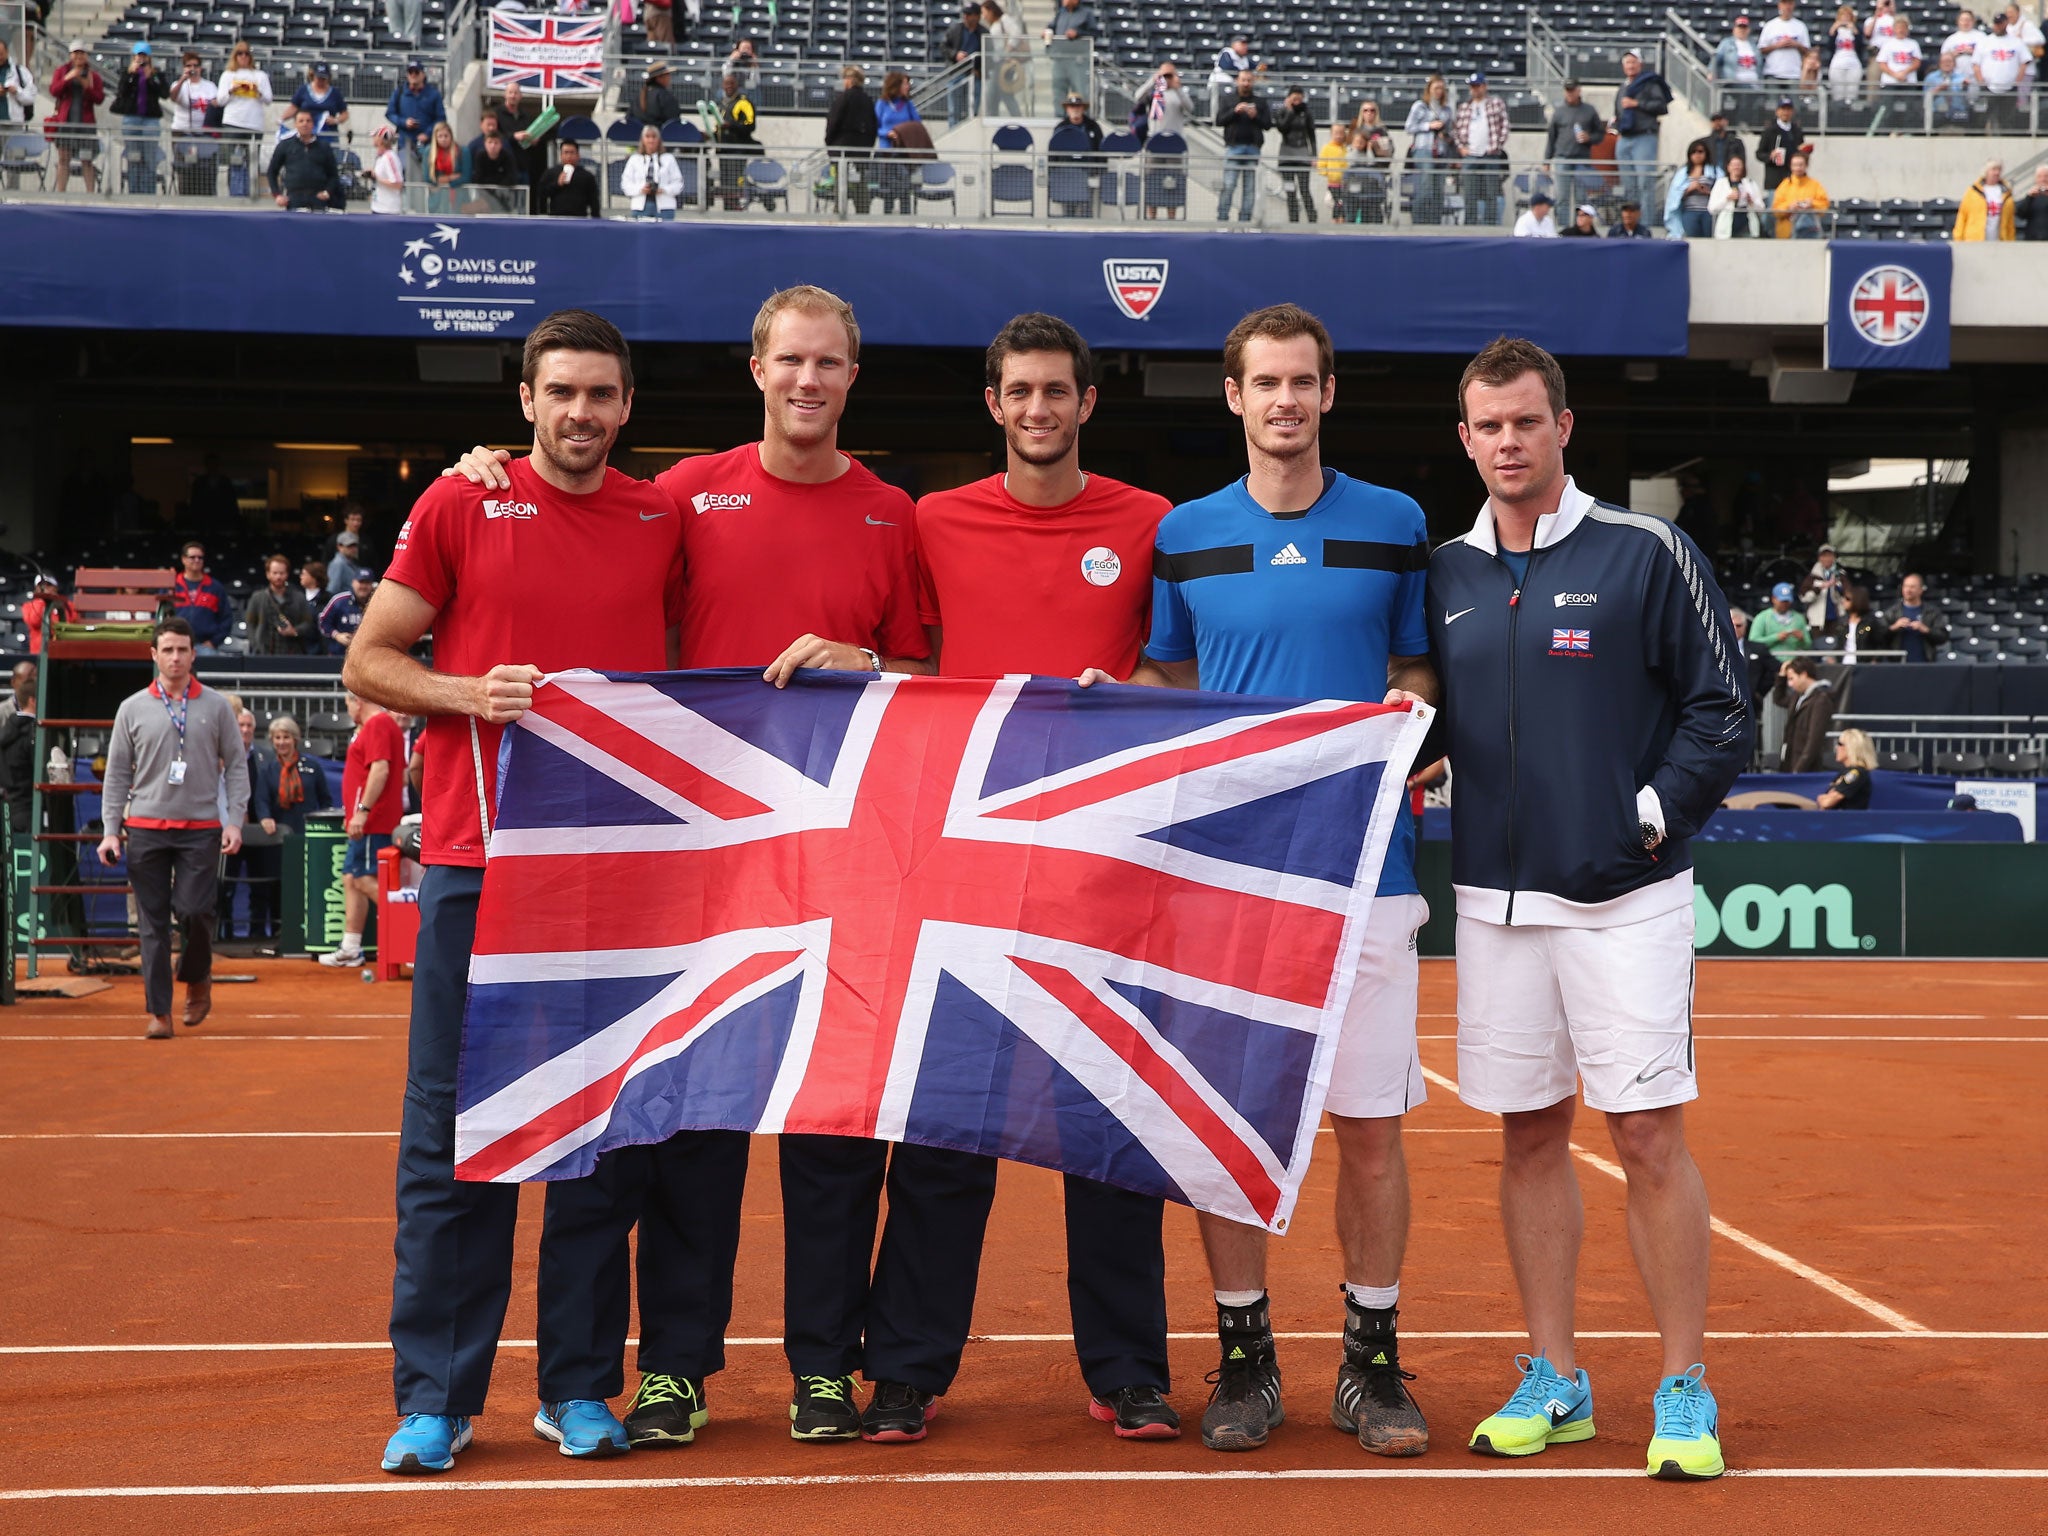 The Great British team pose after their Davis Cup victory over the United States saw them book their place in the quarter-finals